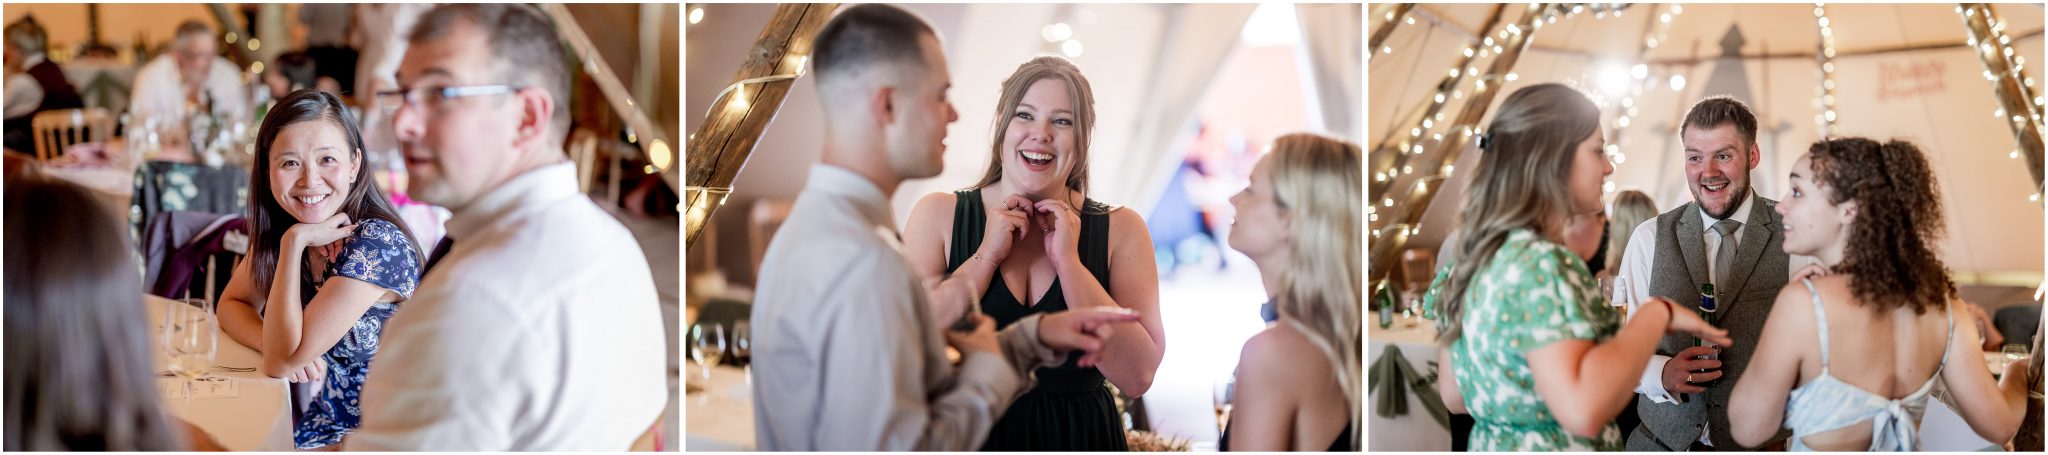 Guests talking and laughing during the wedding reception